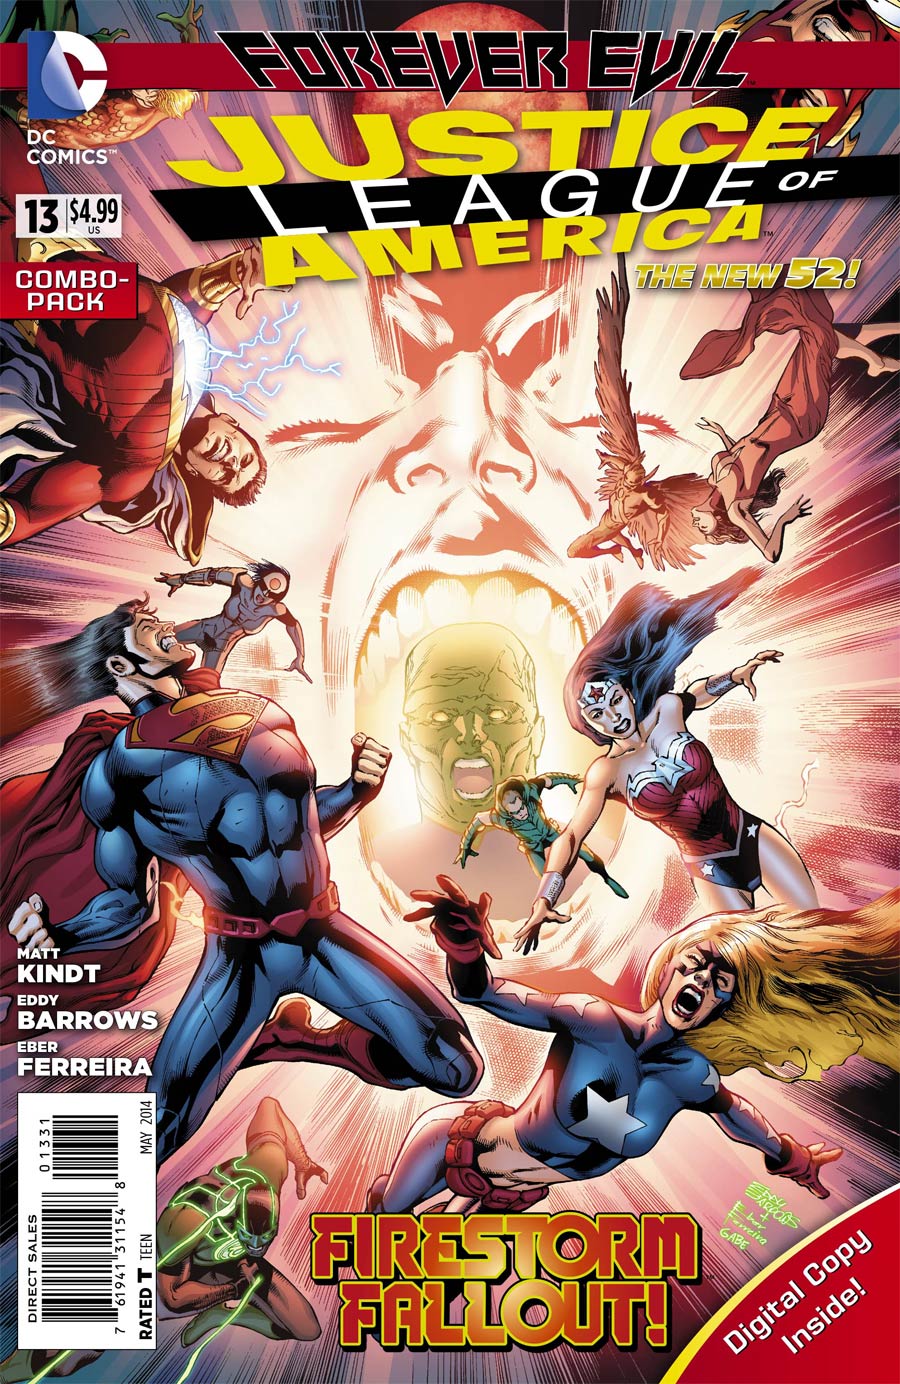 Justice League Of America Vol 3 #13 Cover B Combo Pack With Polybag (Forever Evil Tie-In)